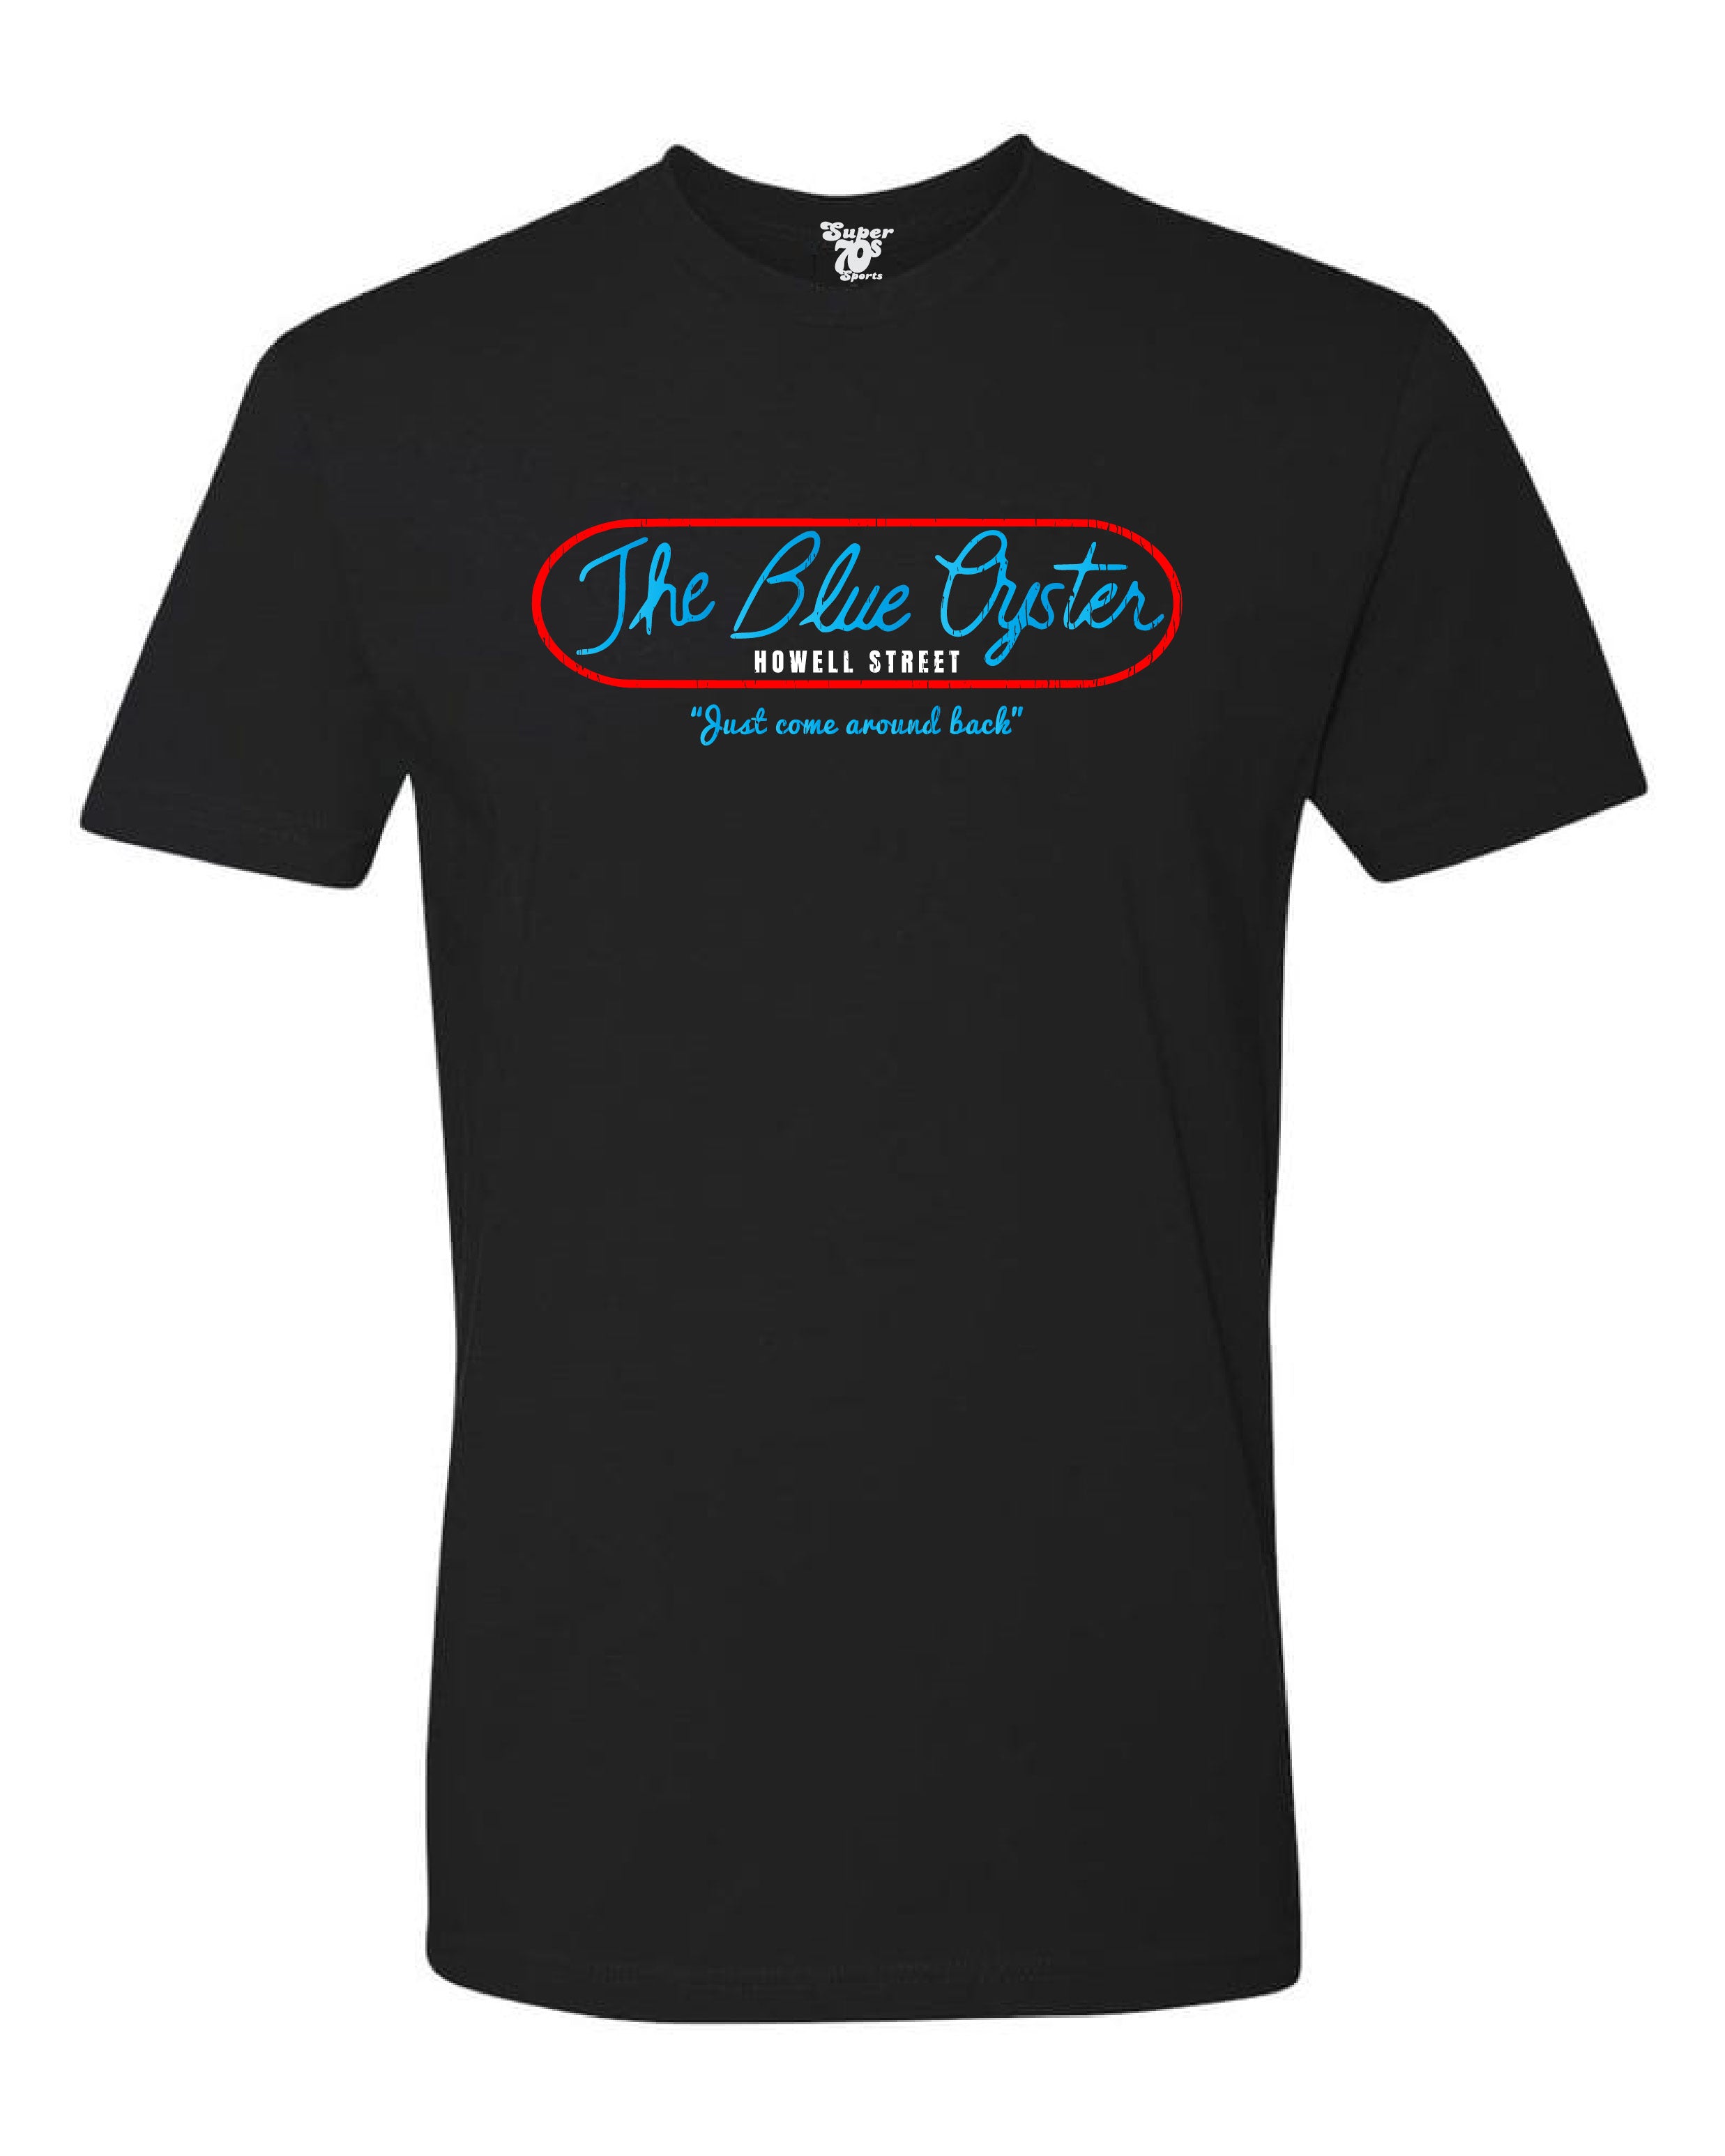 The Blue Oyster Tee – Super 70s Sports